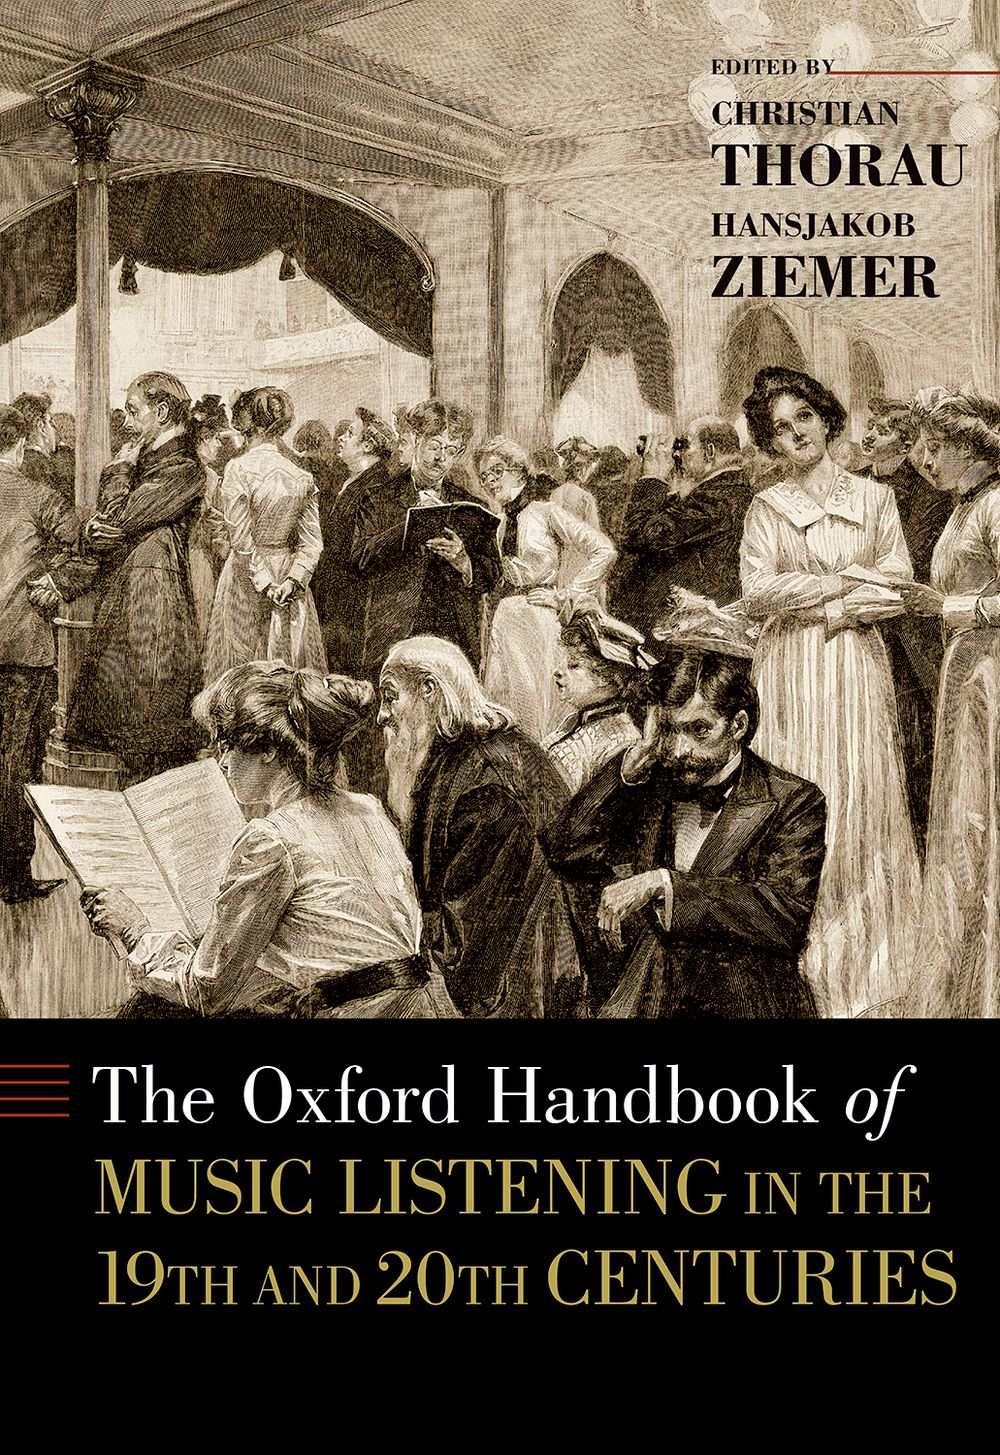 The Oxford Handbook of Music Listening: Reference